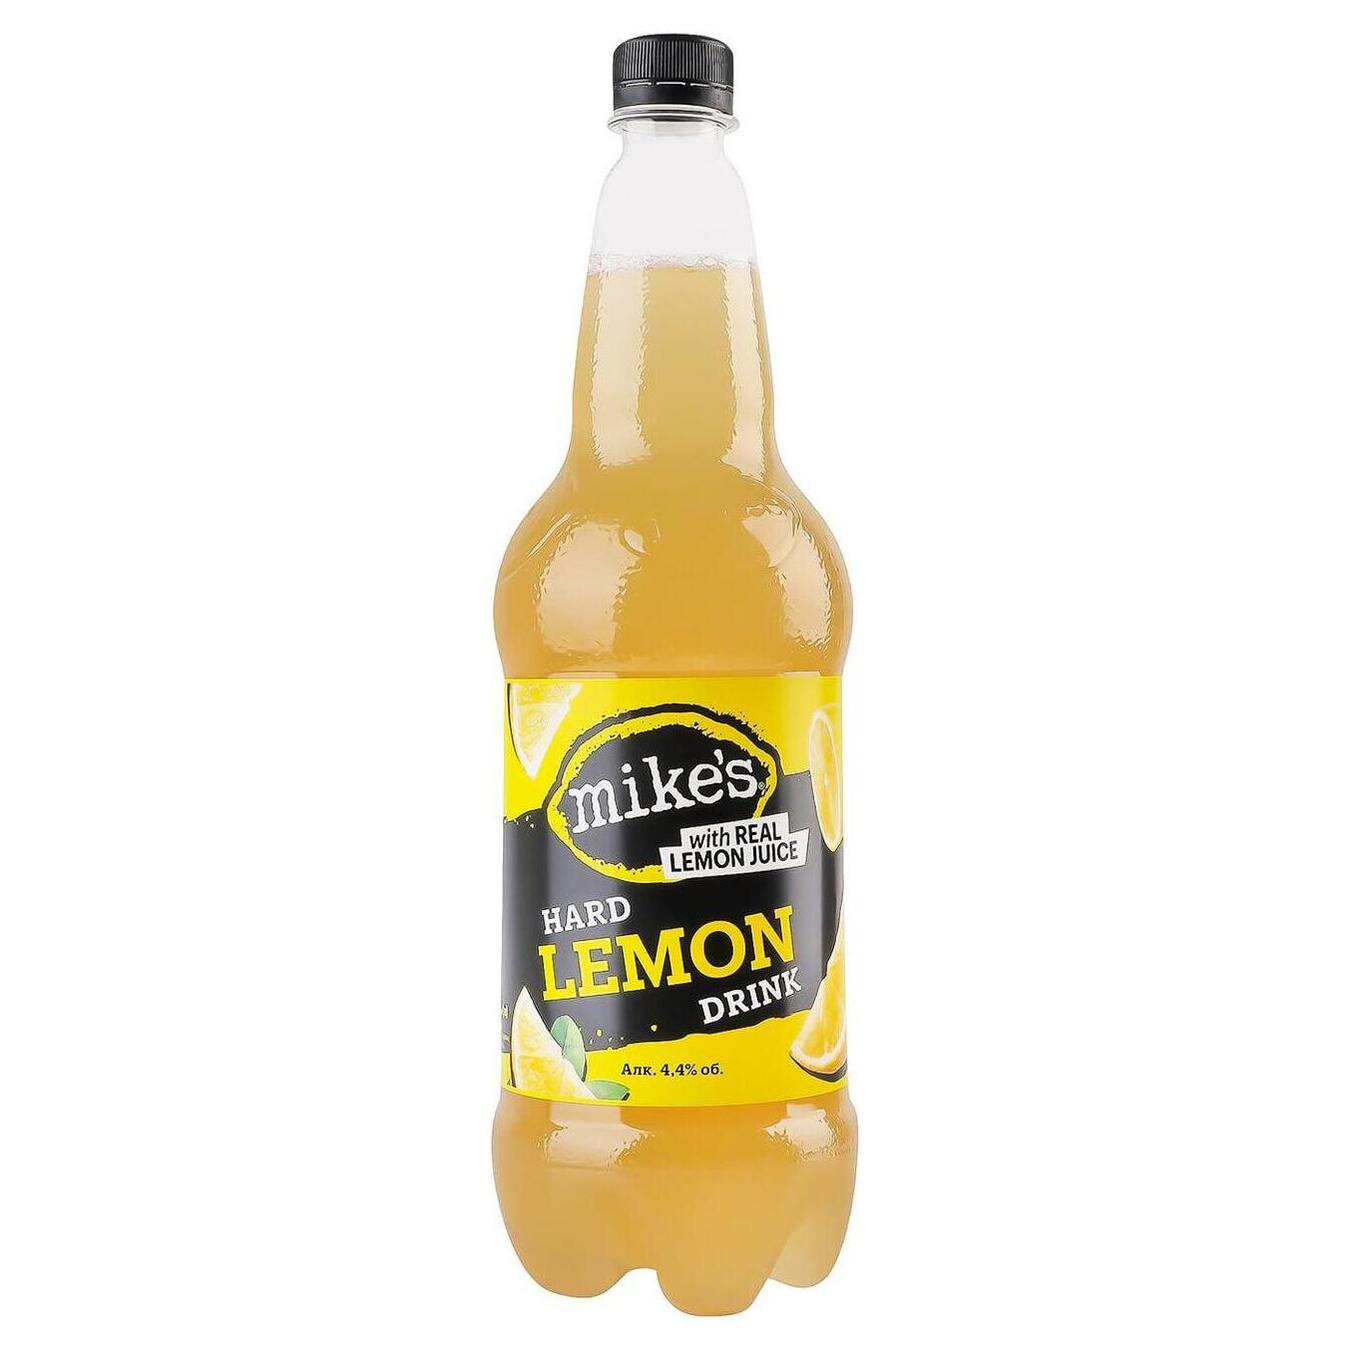 MIKES special beer with lemon juice 4.4% 0.88L PET